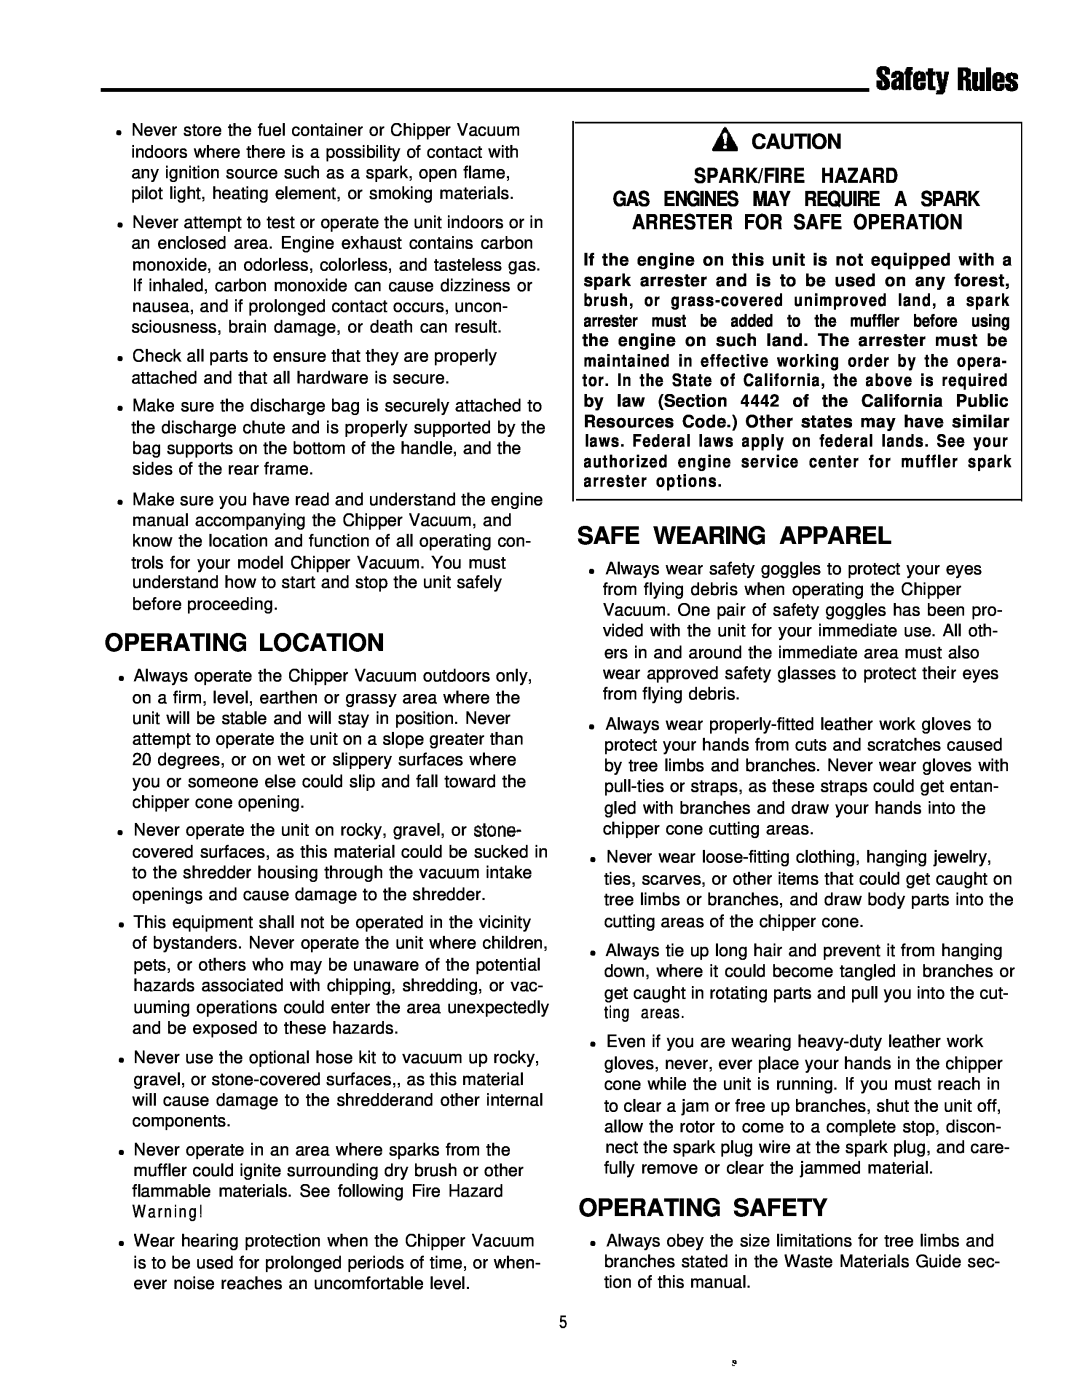 Simplicity 6/25, 8/25 manual Operating Location, Safe Wearing Apparel, Operating Safety, A Caution Spark/Fire Hazard 